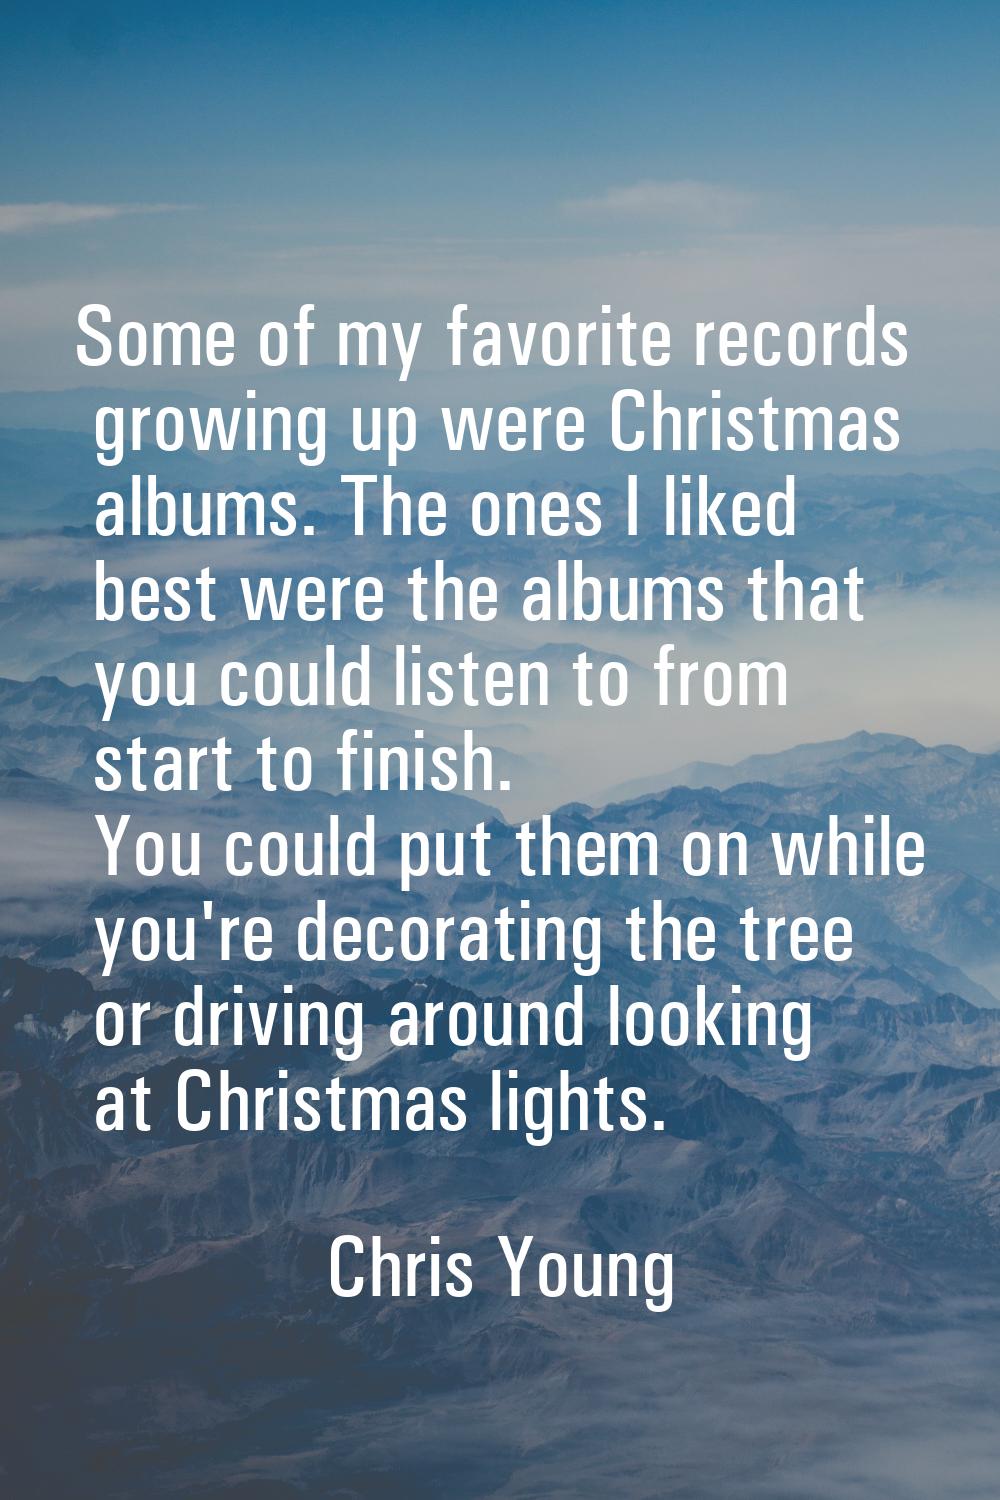 Some of my favorite records growing up were Christmas albums. The ones I liked best were the albums